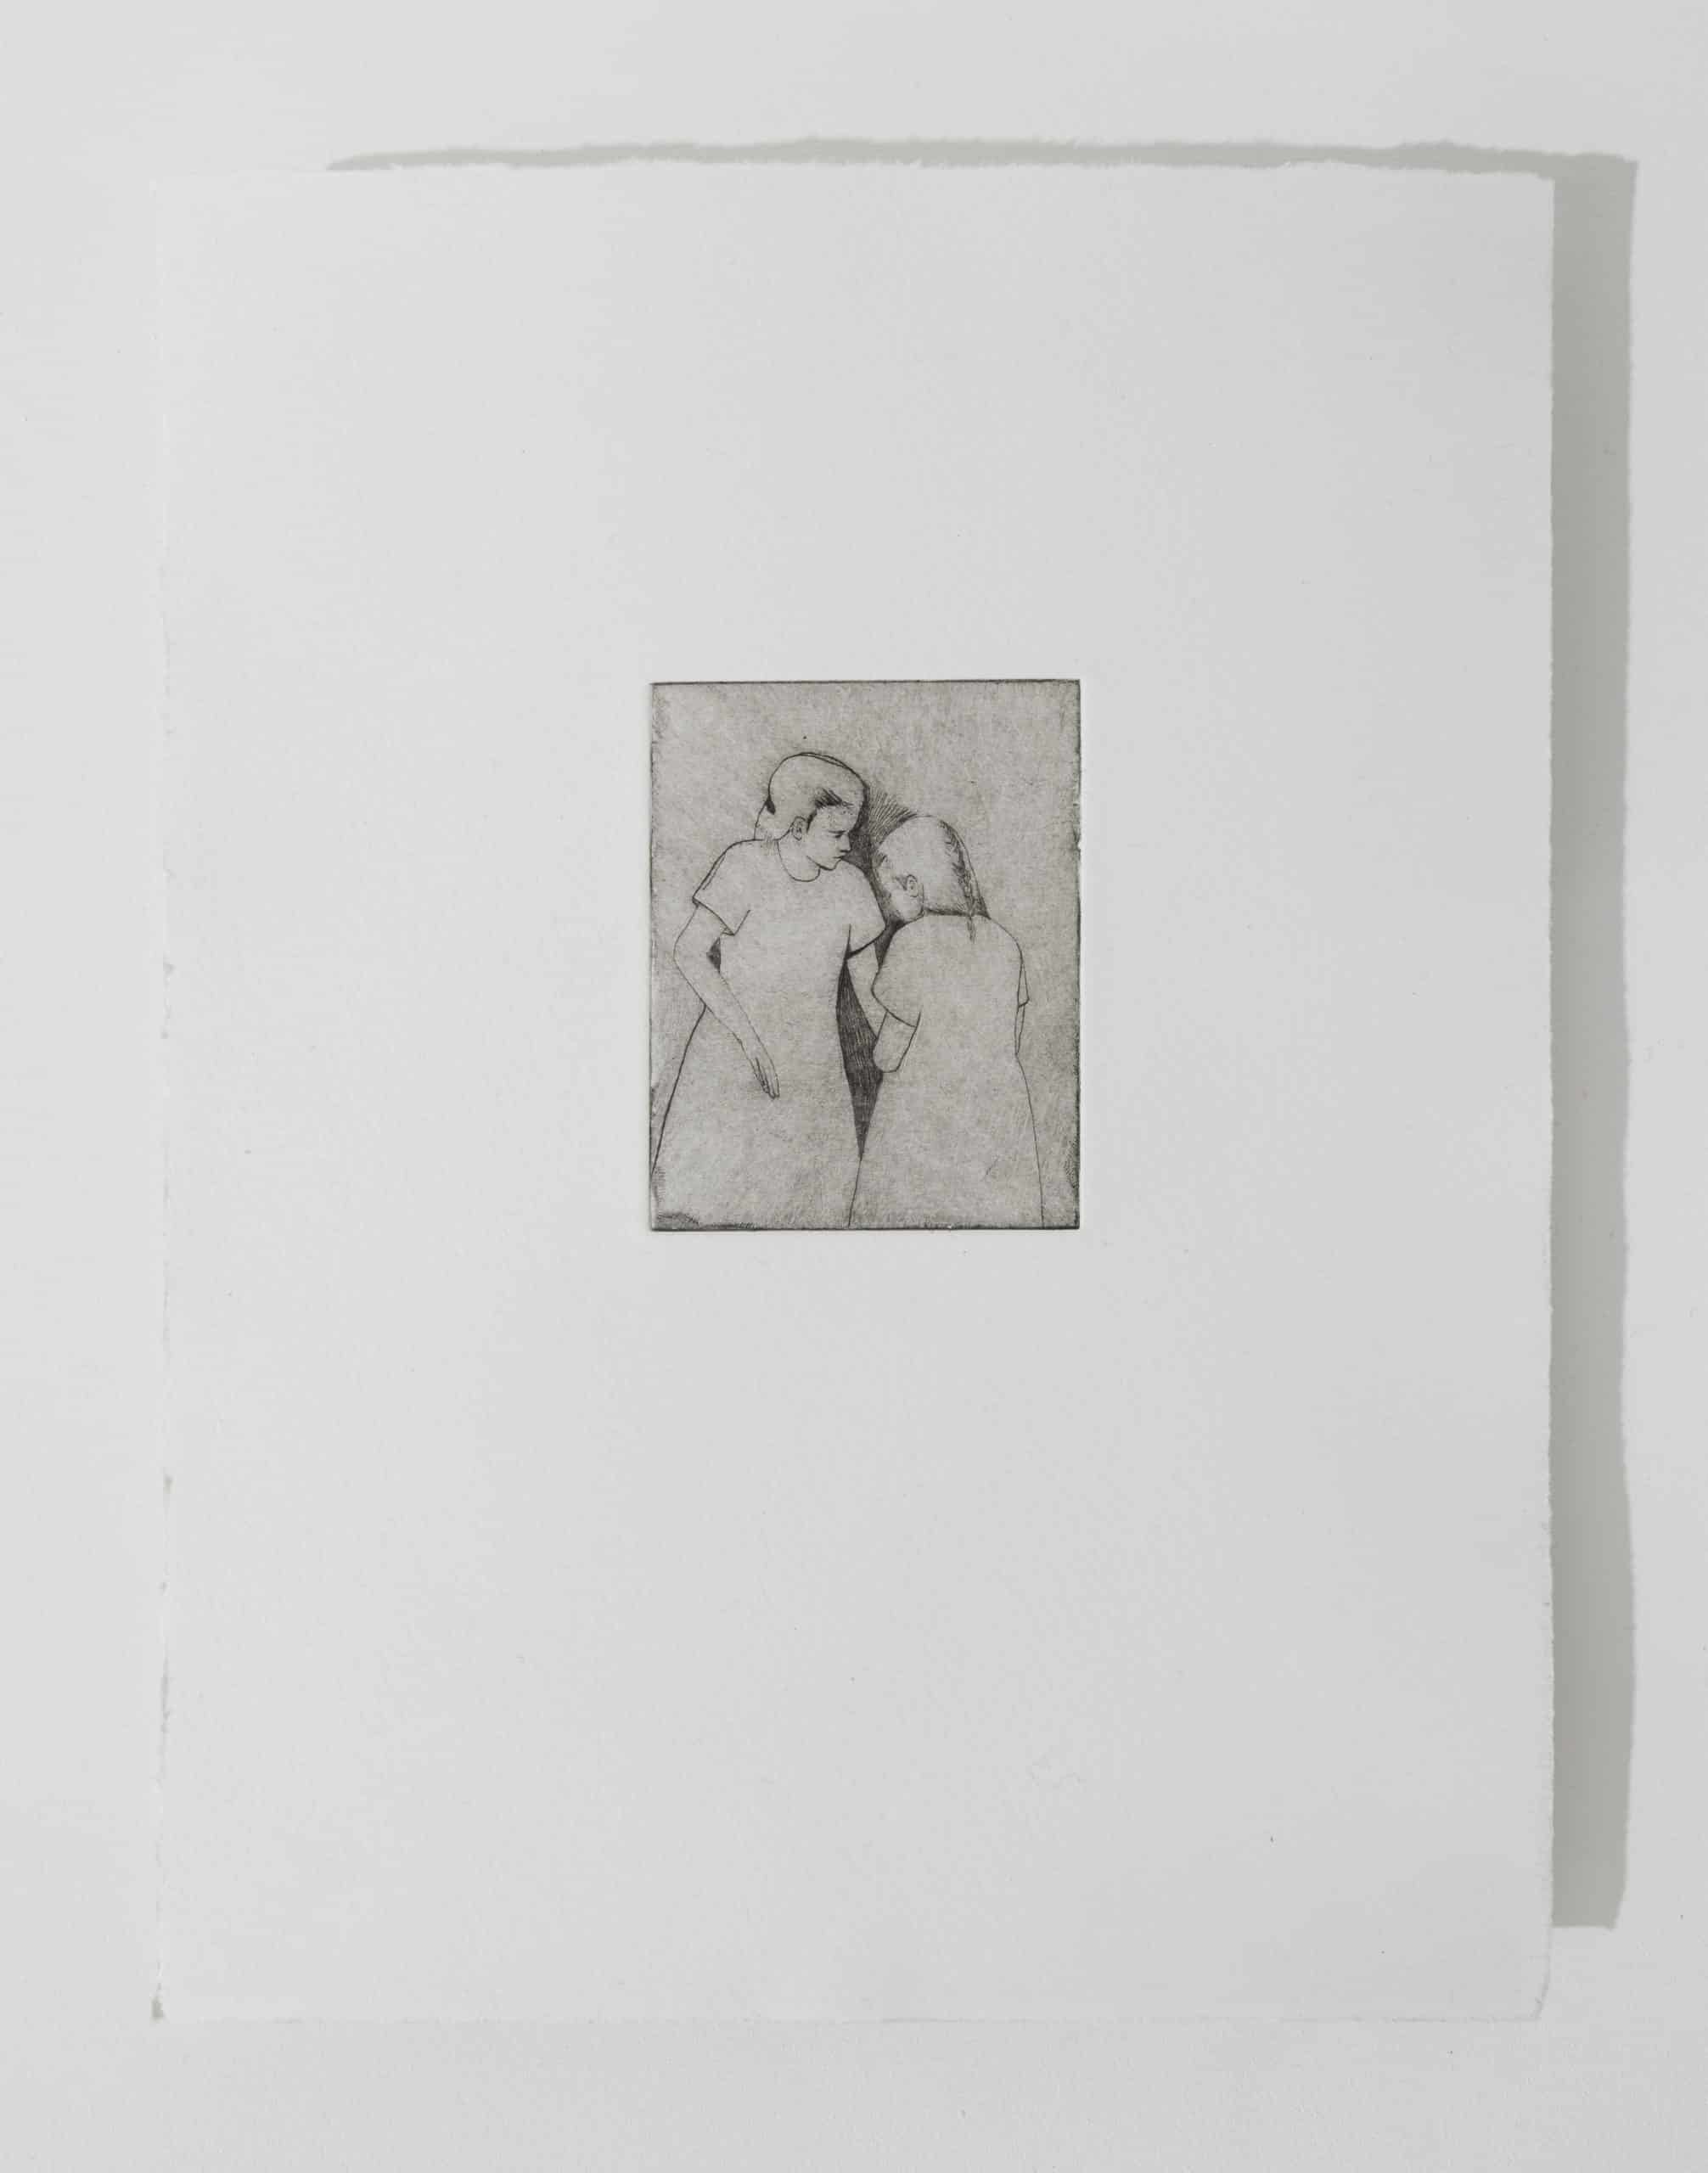 Holy Moments etching by Catherine Repko, Huxley-Parlour Gallery, 3-5 Swallow Street, London, W1B 4DE